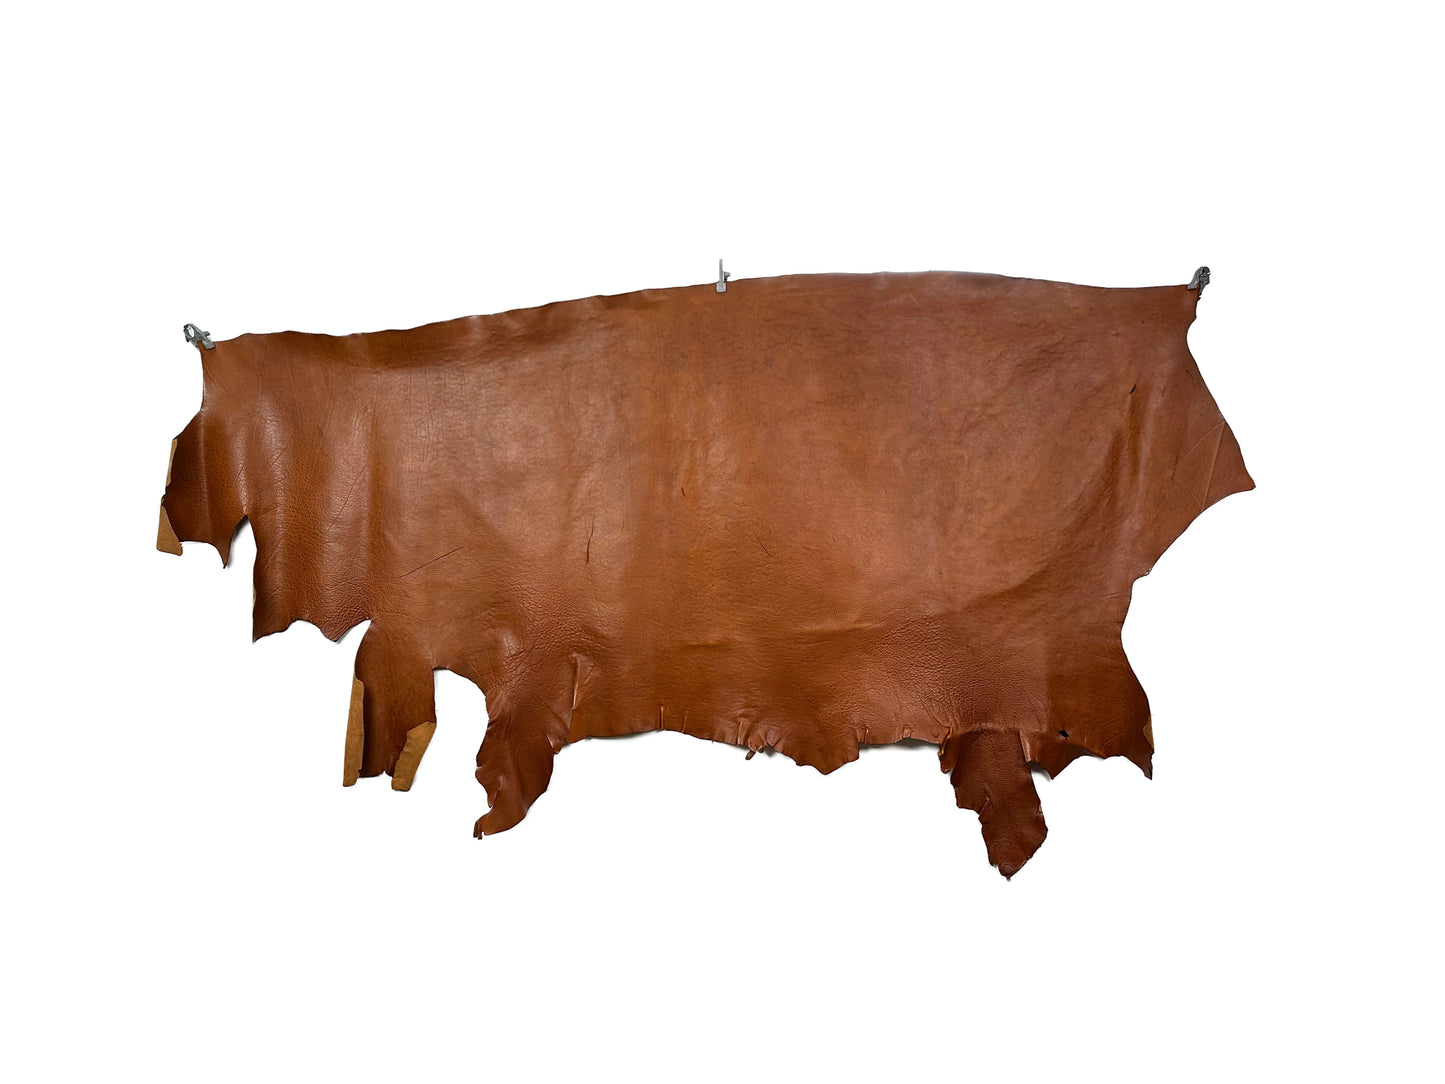 MW Natural Tanned Shrink Leather #2 Brown 